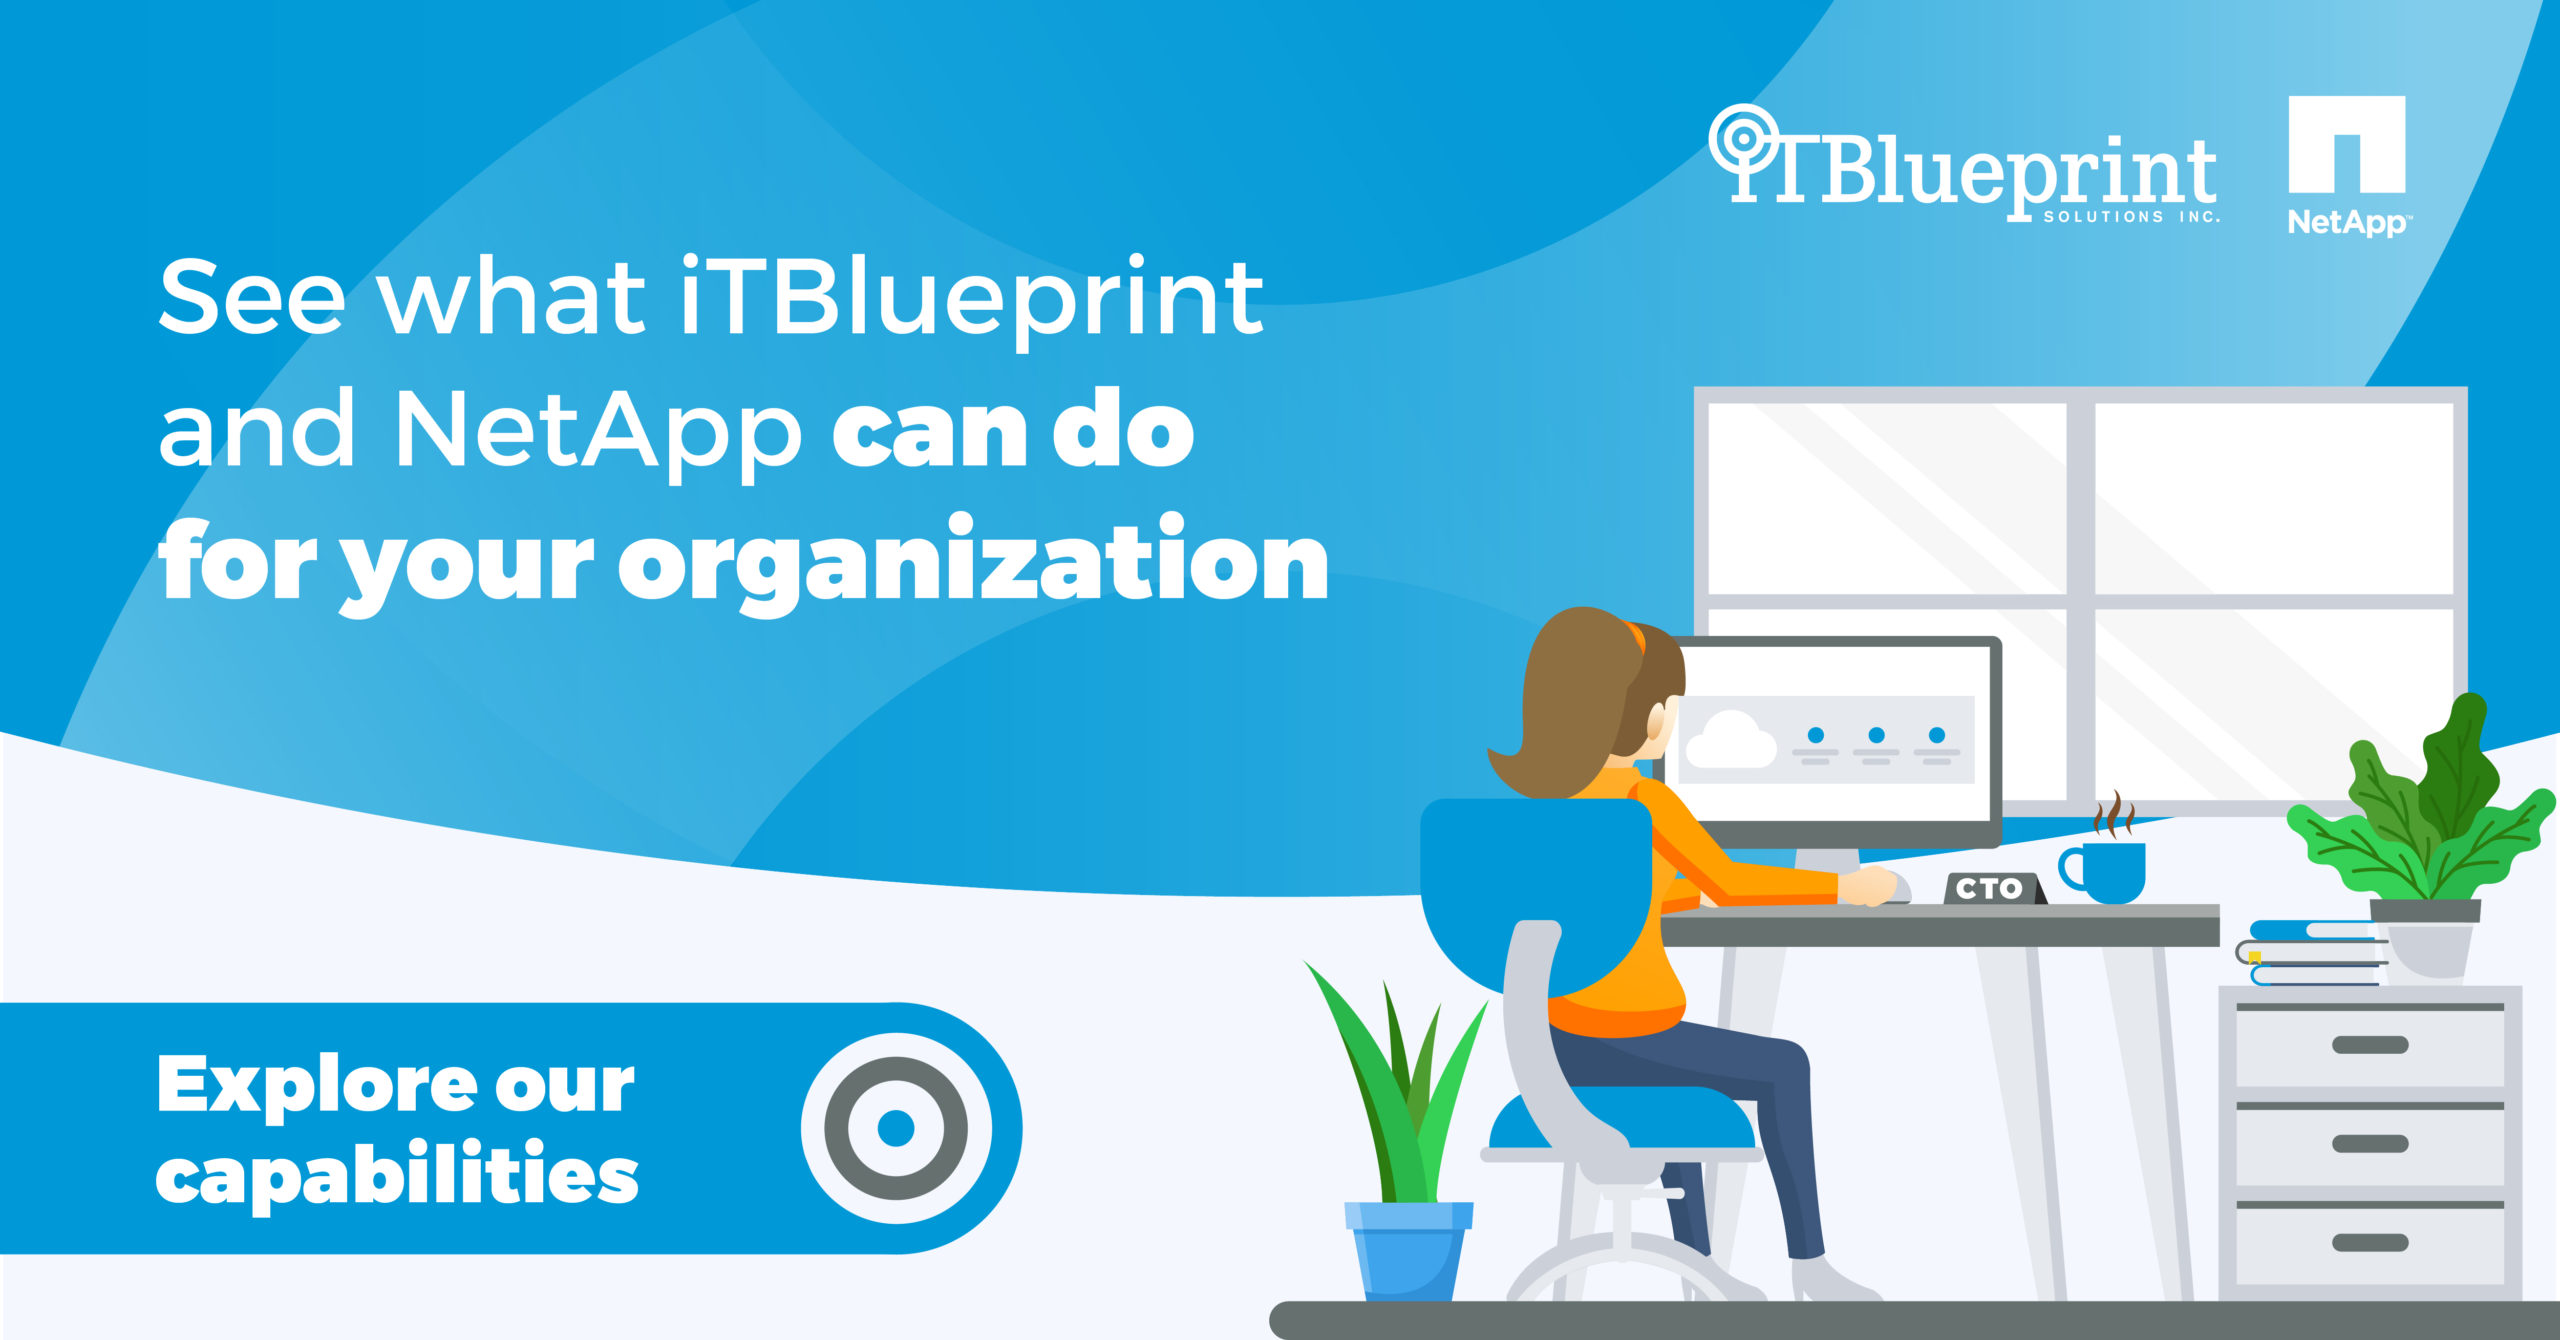 Static social banner primarily blue and white with pops of green using flat illustrations to promote NetApp for ITBlueprint